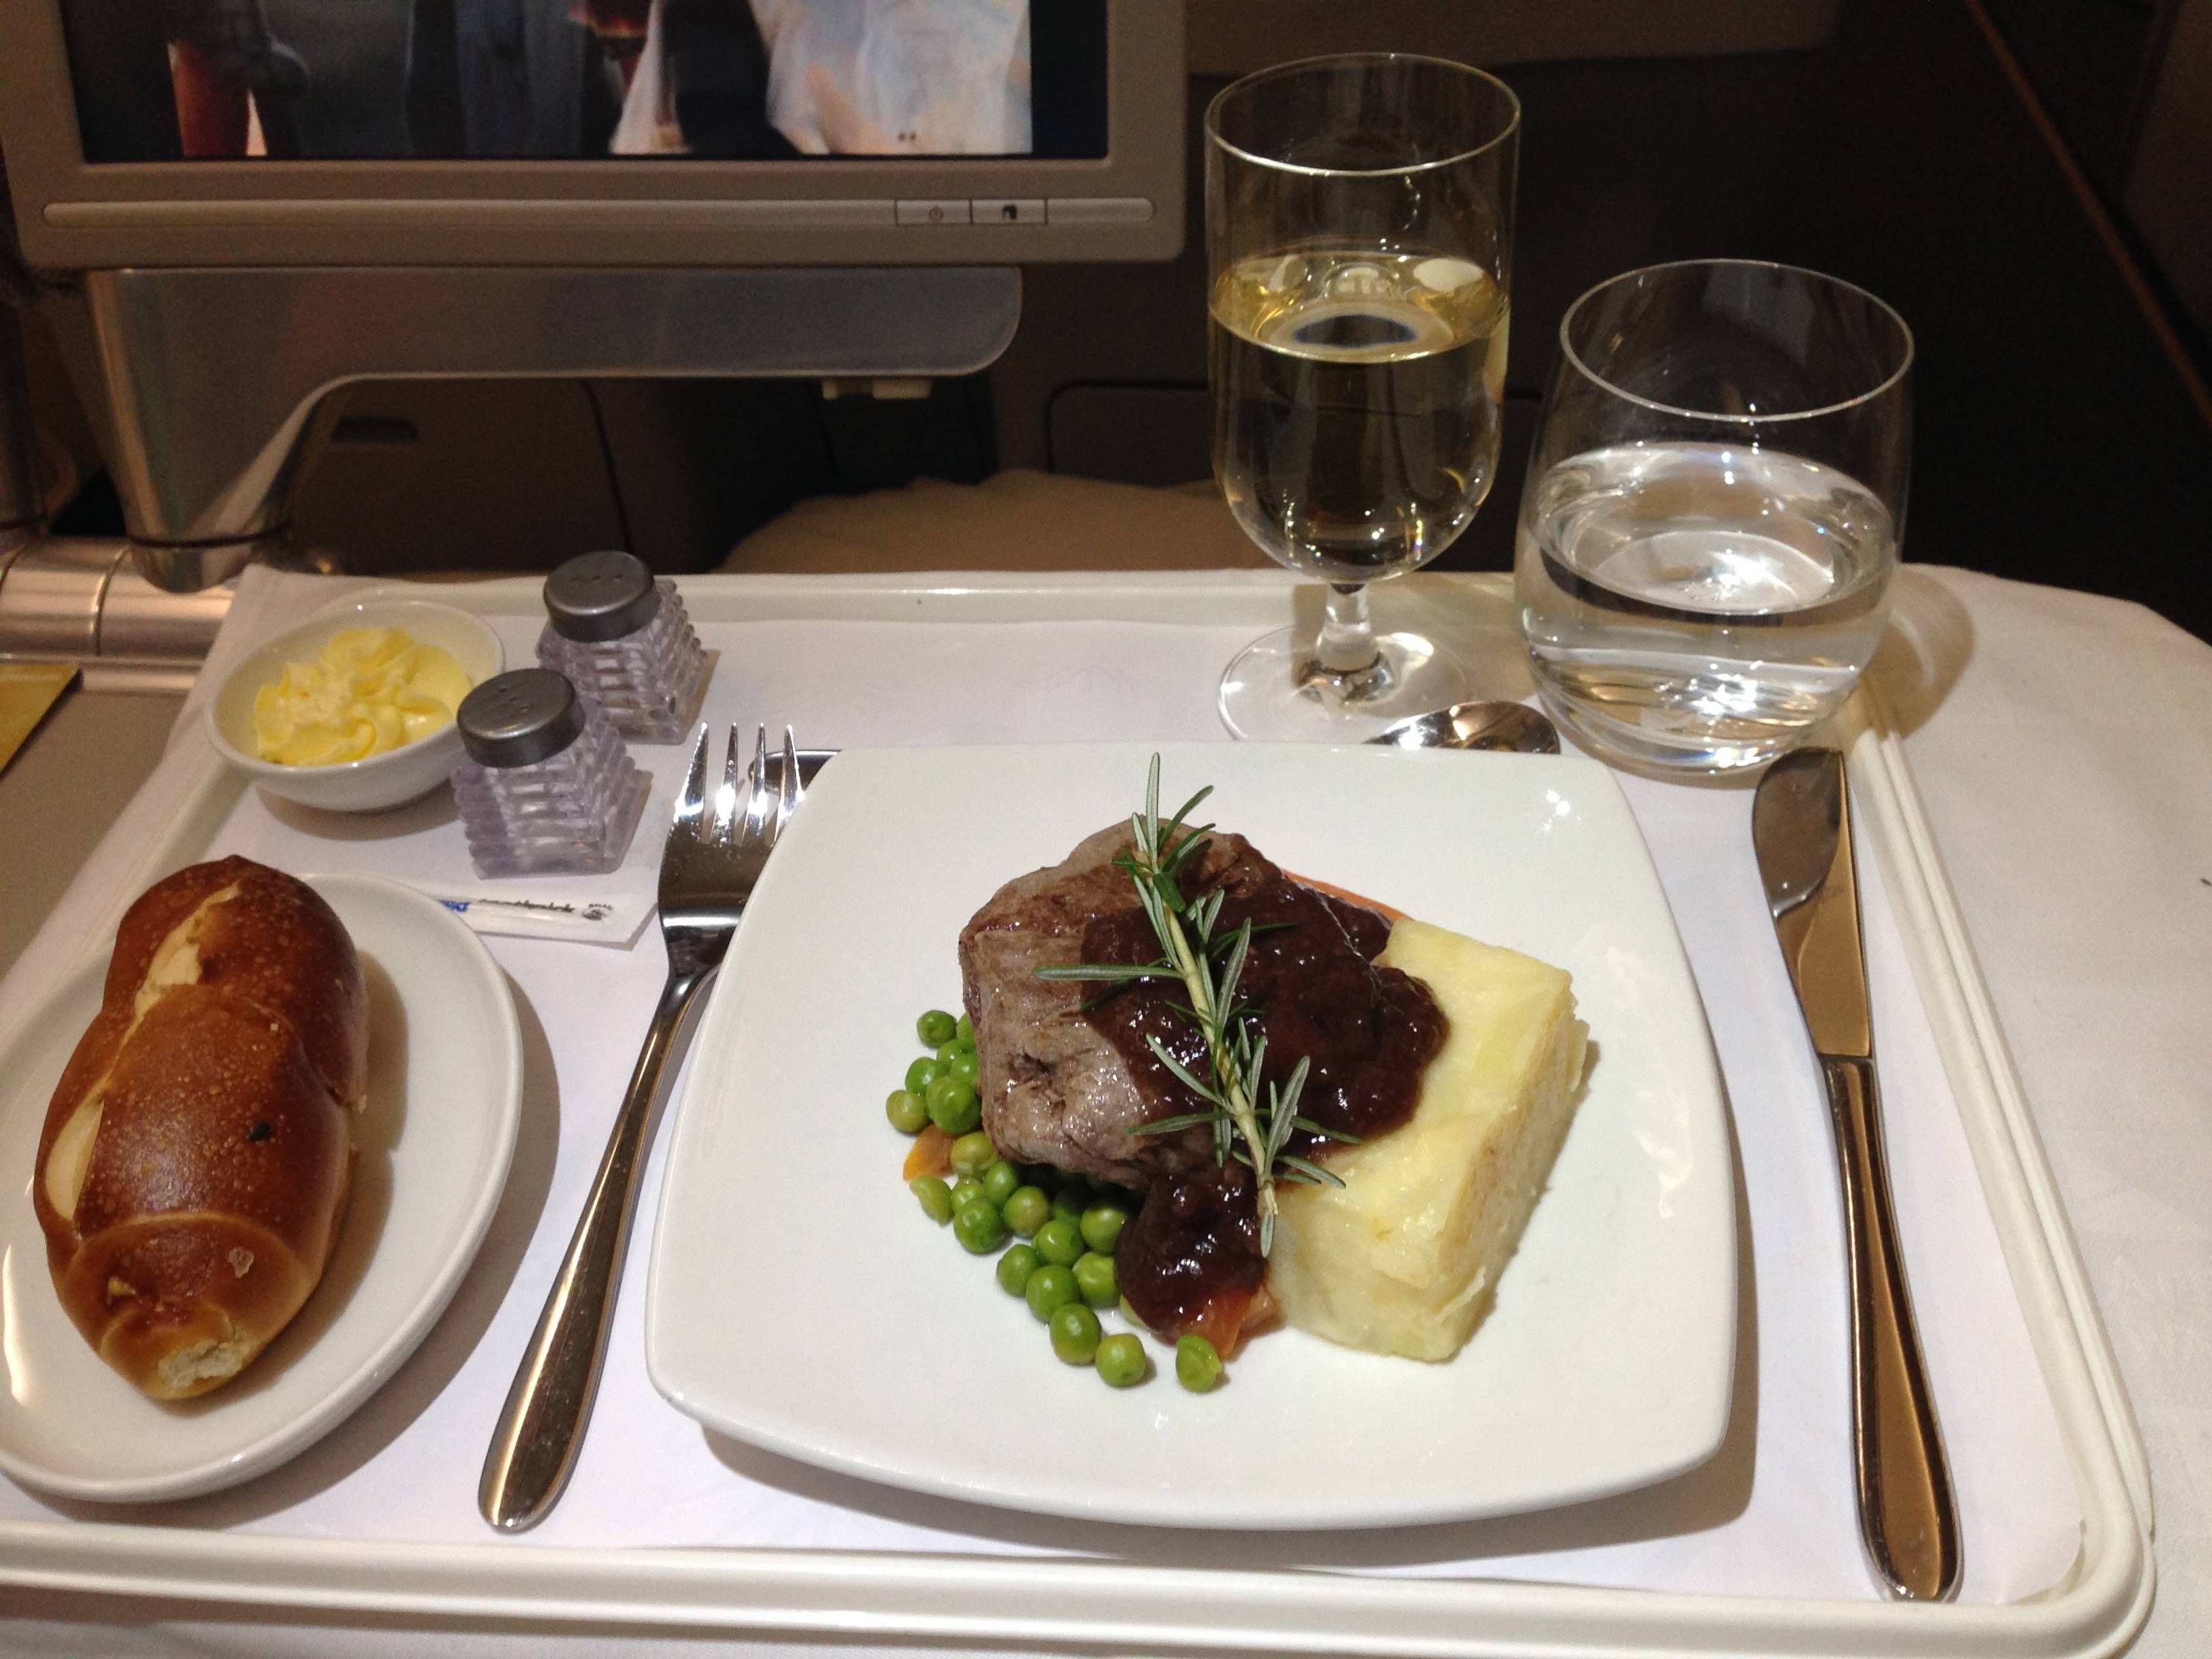 South African Classe Executiva Business Class A330